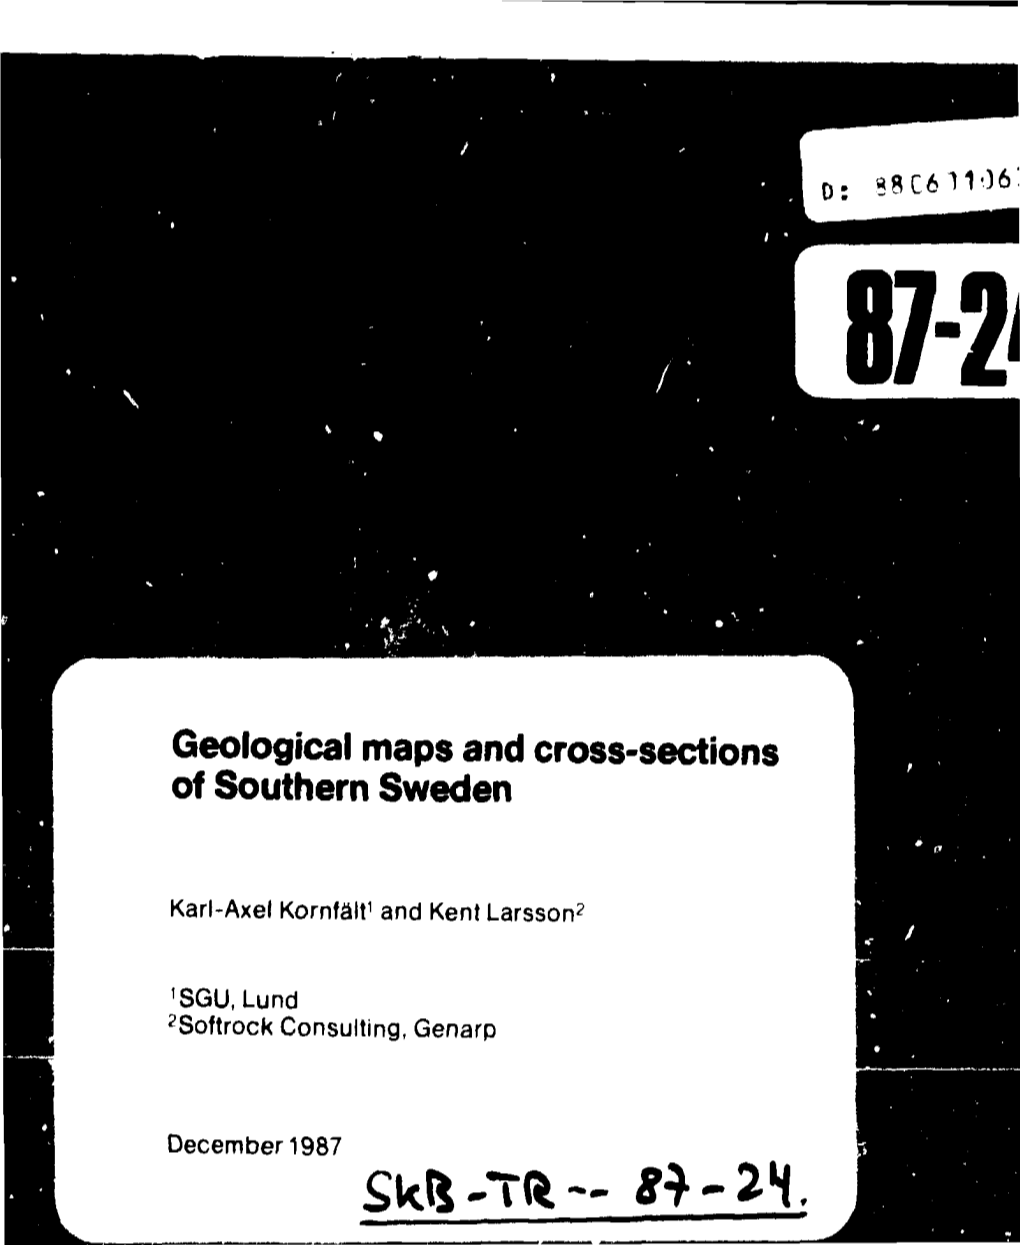 Skfc-Tft- GEOLOGICAL MAPS and CROSS-SECTIONS of SOUTHERN SWEDEN